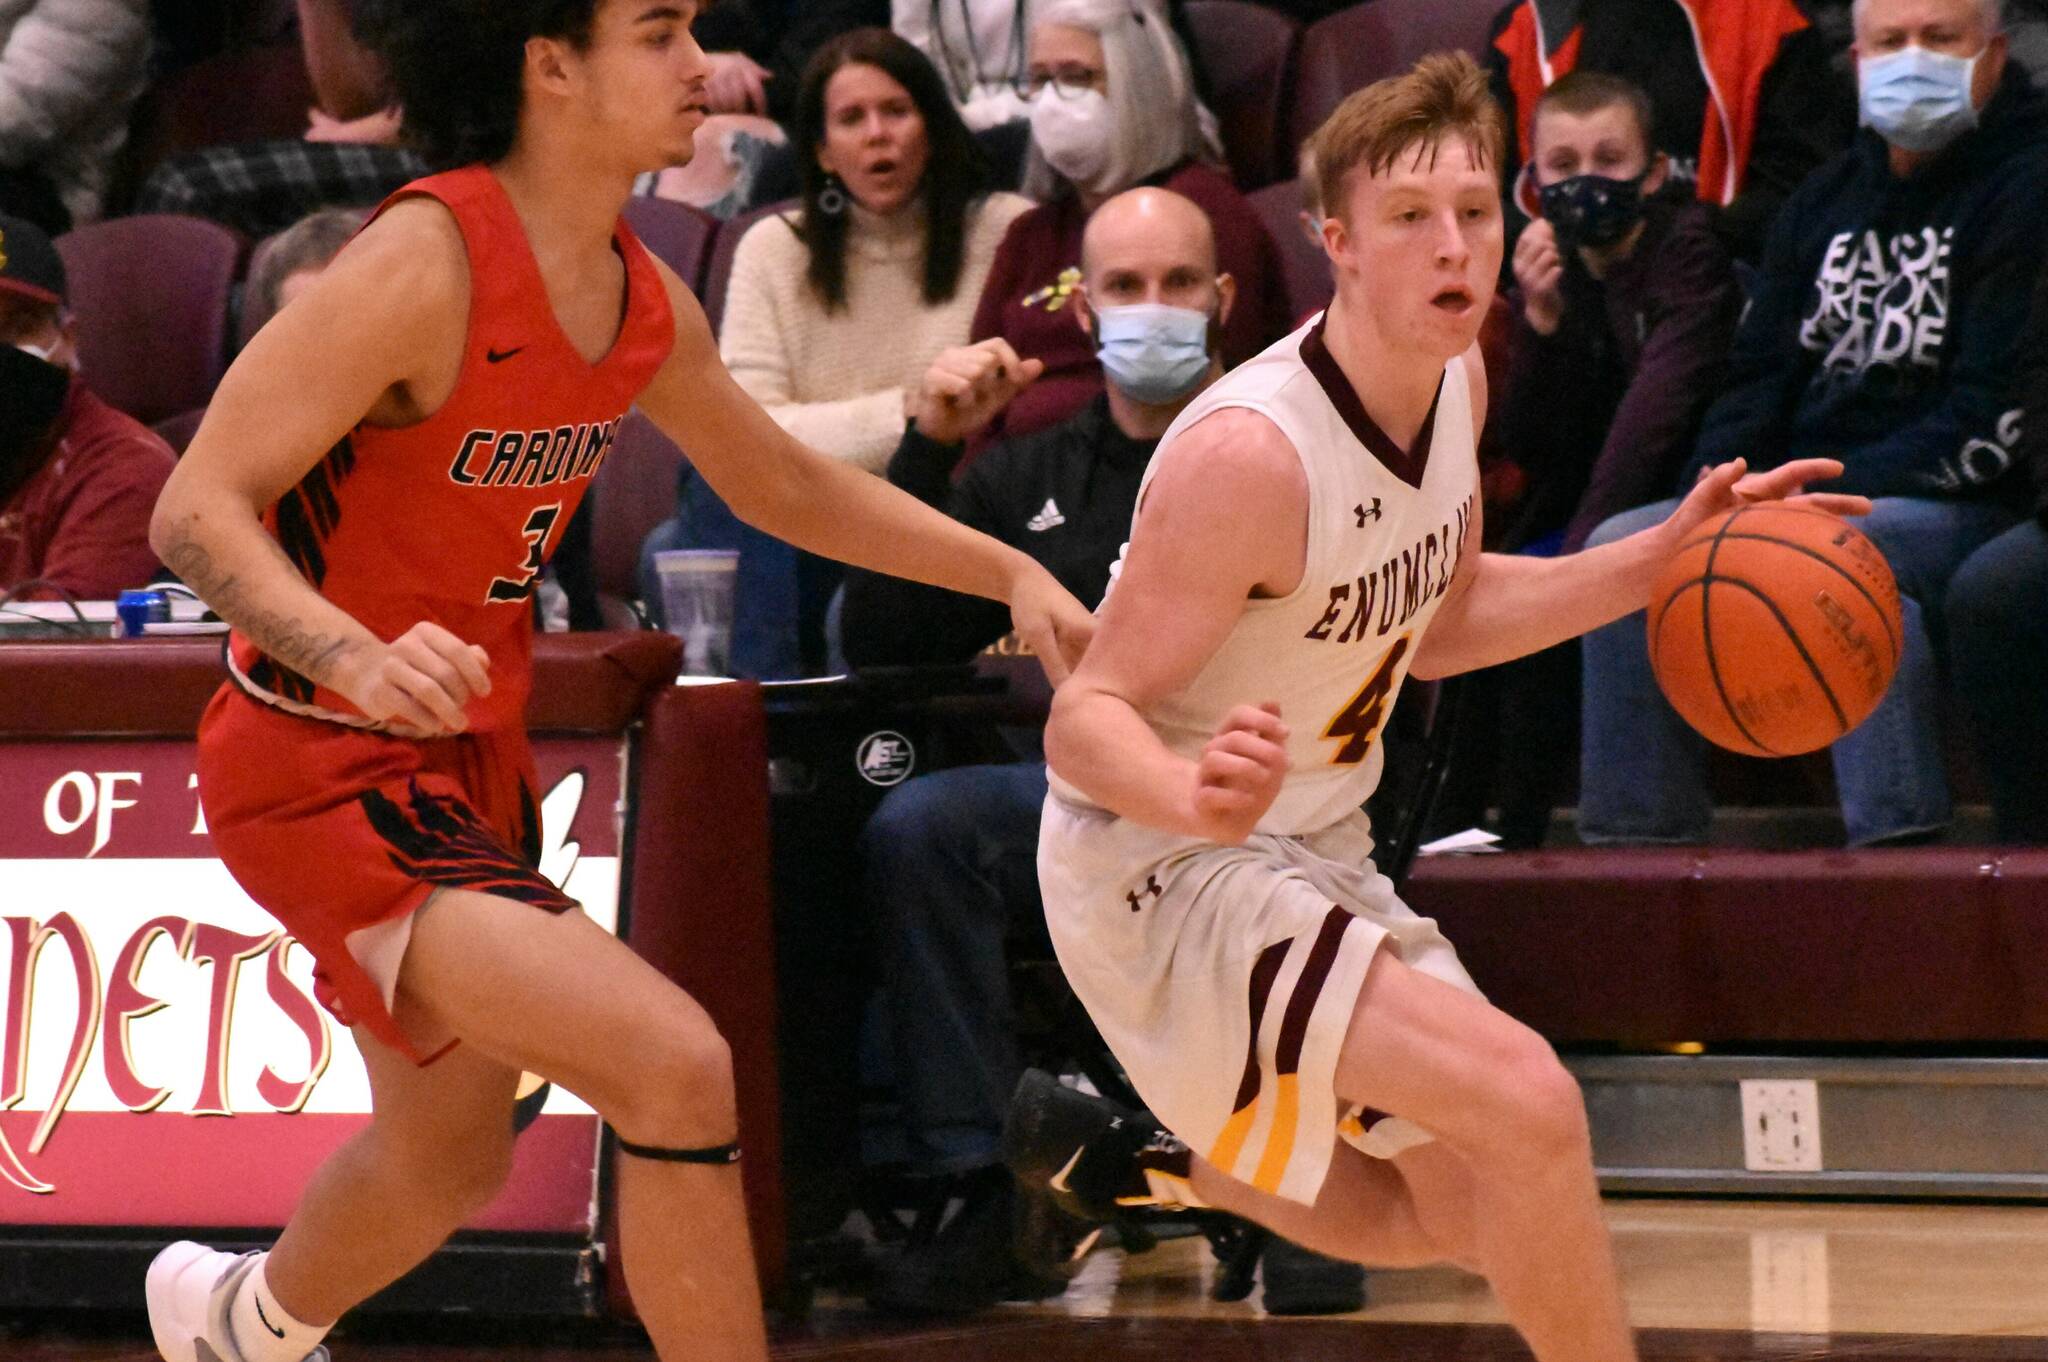 FILE PHOTO BY KEVIN HANSON Enumclaw High’s Noah Seabrands drives to the hoop during a game last season against the Orting Cardinals. Now a senior, Seabrands earned second team, all-league honors a year ago.